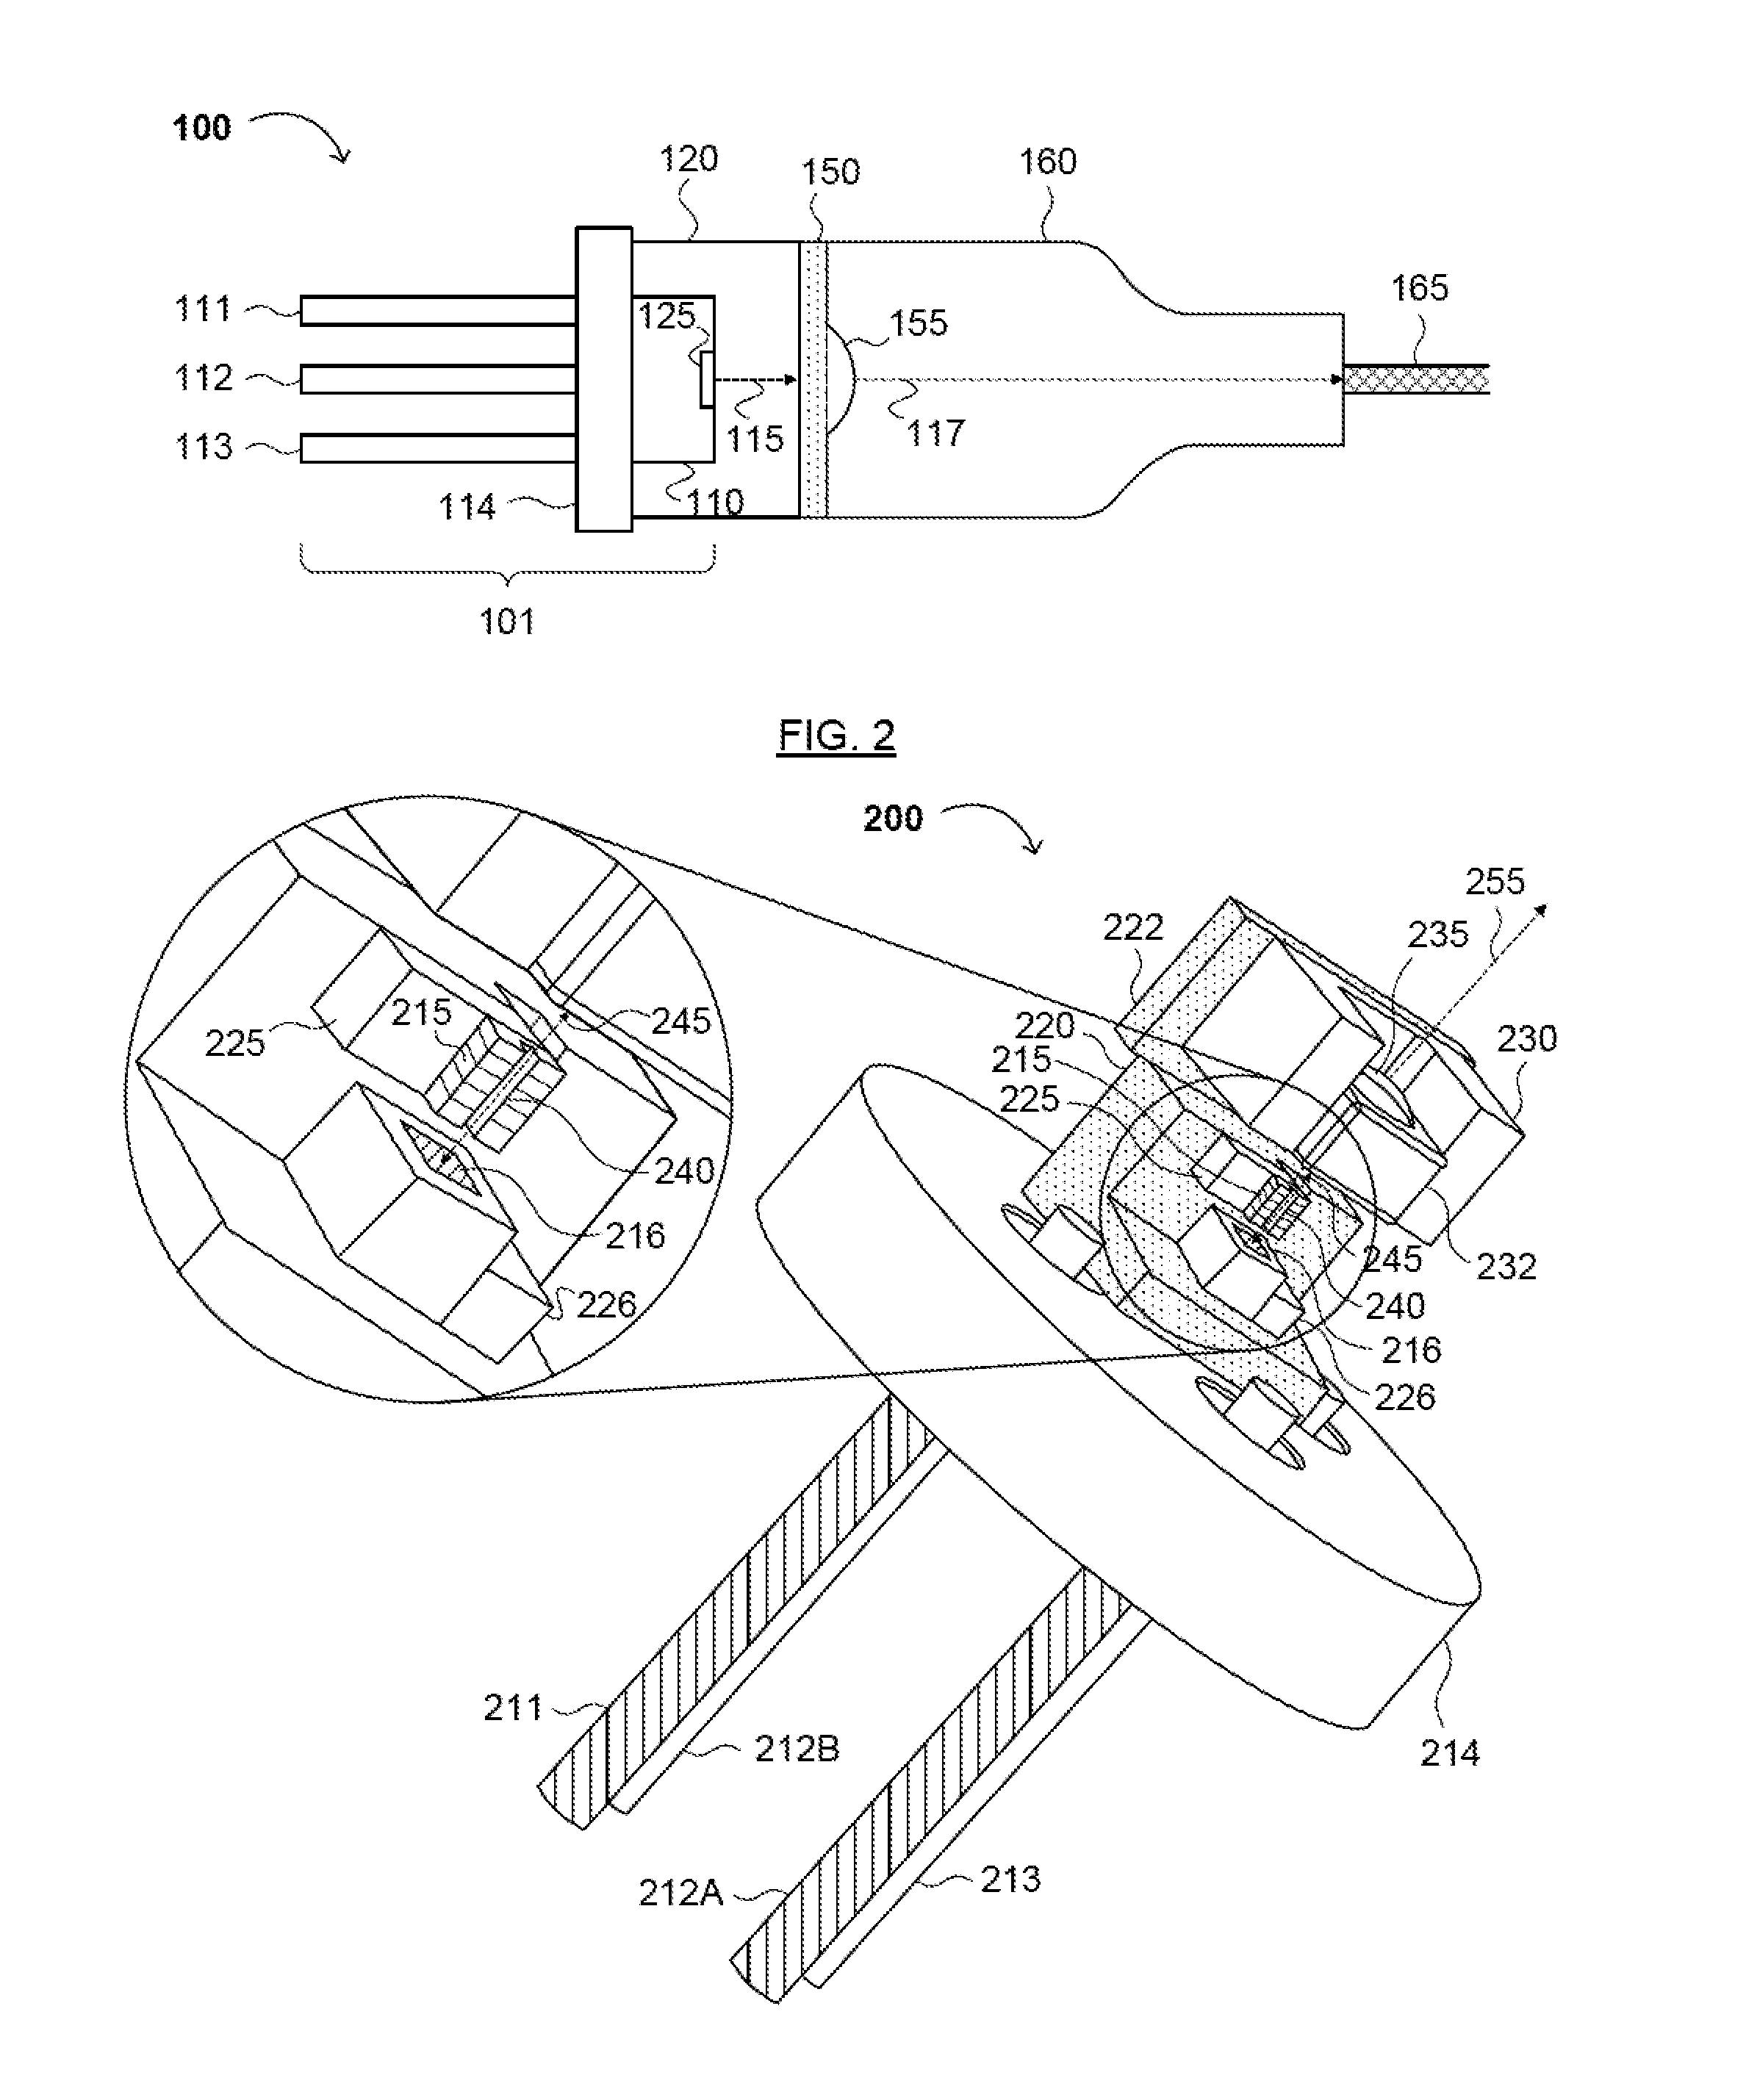 Optical Transmitter Assembly, Optical Transceivers Including the Same, and Methods of Making and Using Such Optical Transmitter Assemblies and Optical Transceivers